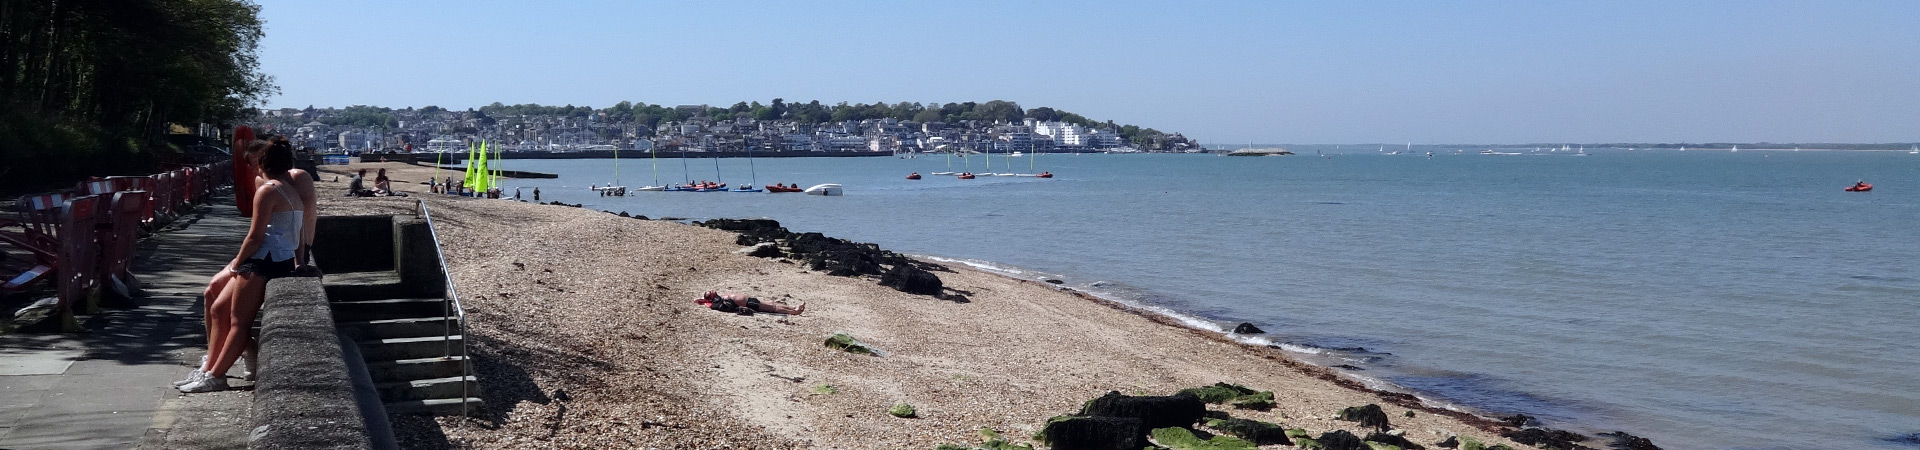 East Cowes beach review